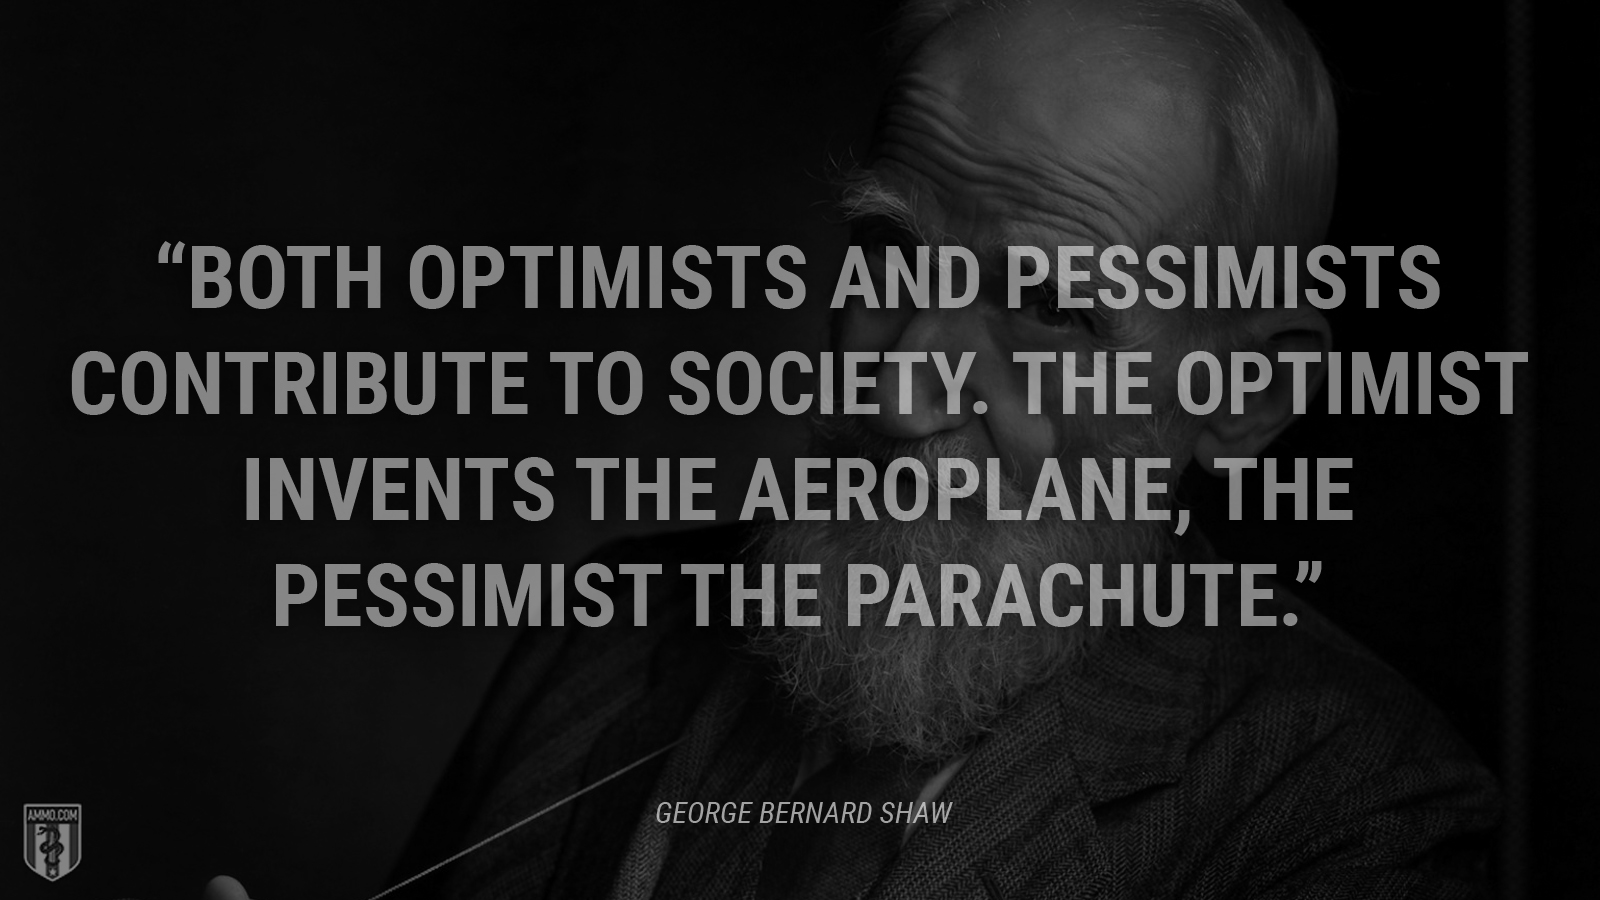 “Both optimists and pessimists contribute to society. The optimist invents the aeroplane, the pessimist the parachute.” - George Bernard Shaw